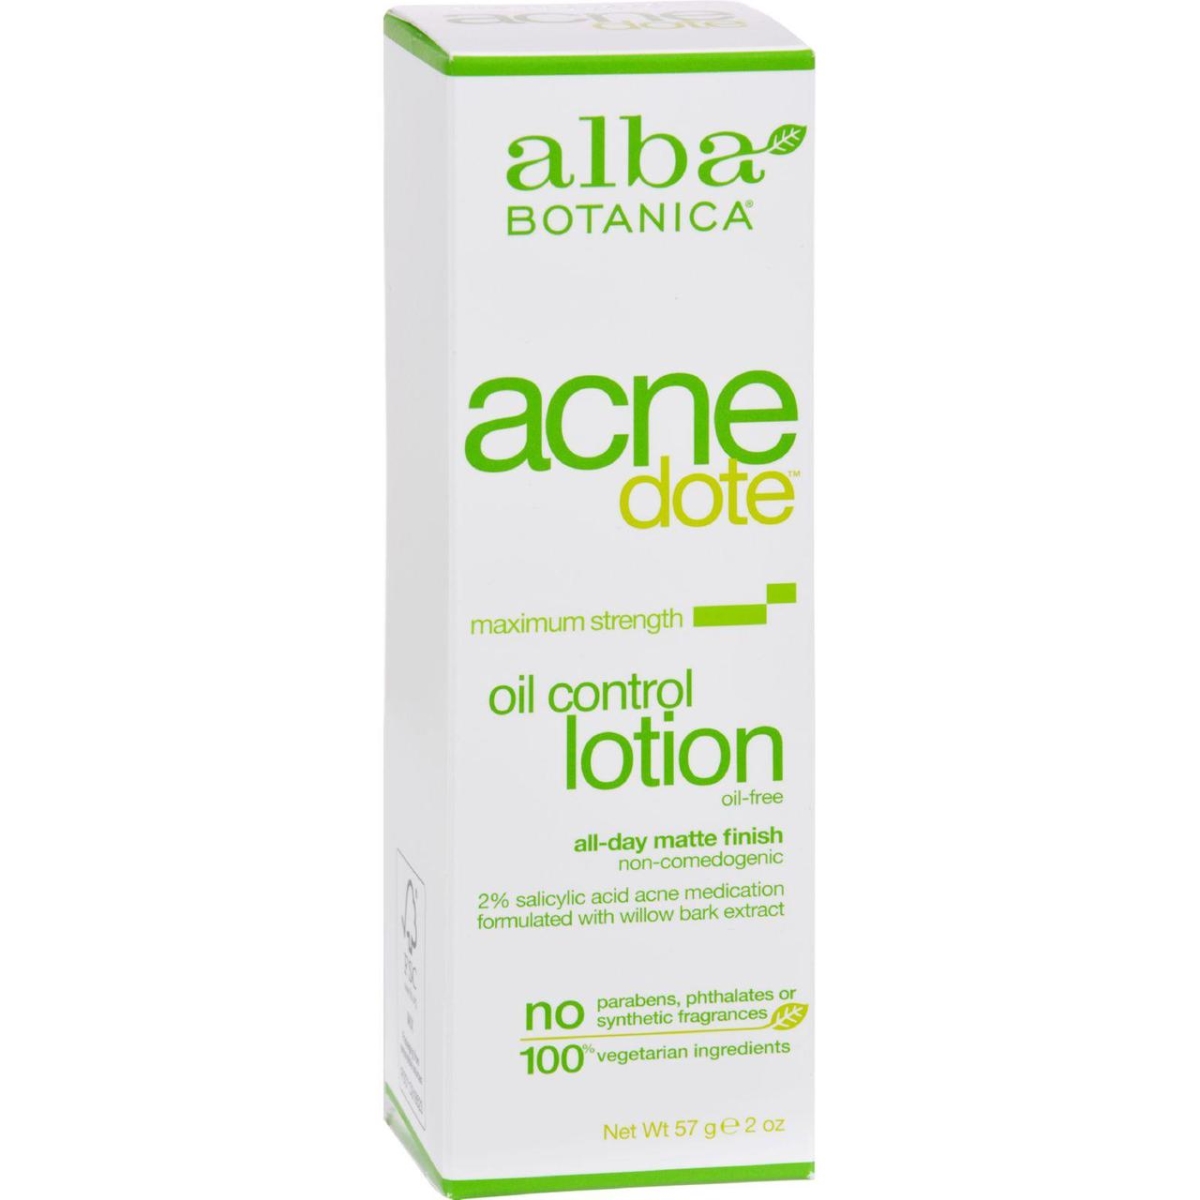 Hg0404913 2 Fl Oz Natural Acnedote Oil Control Lotion